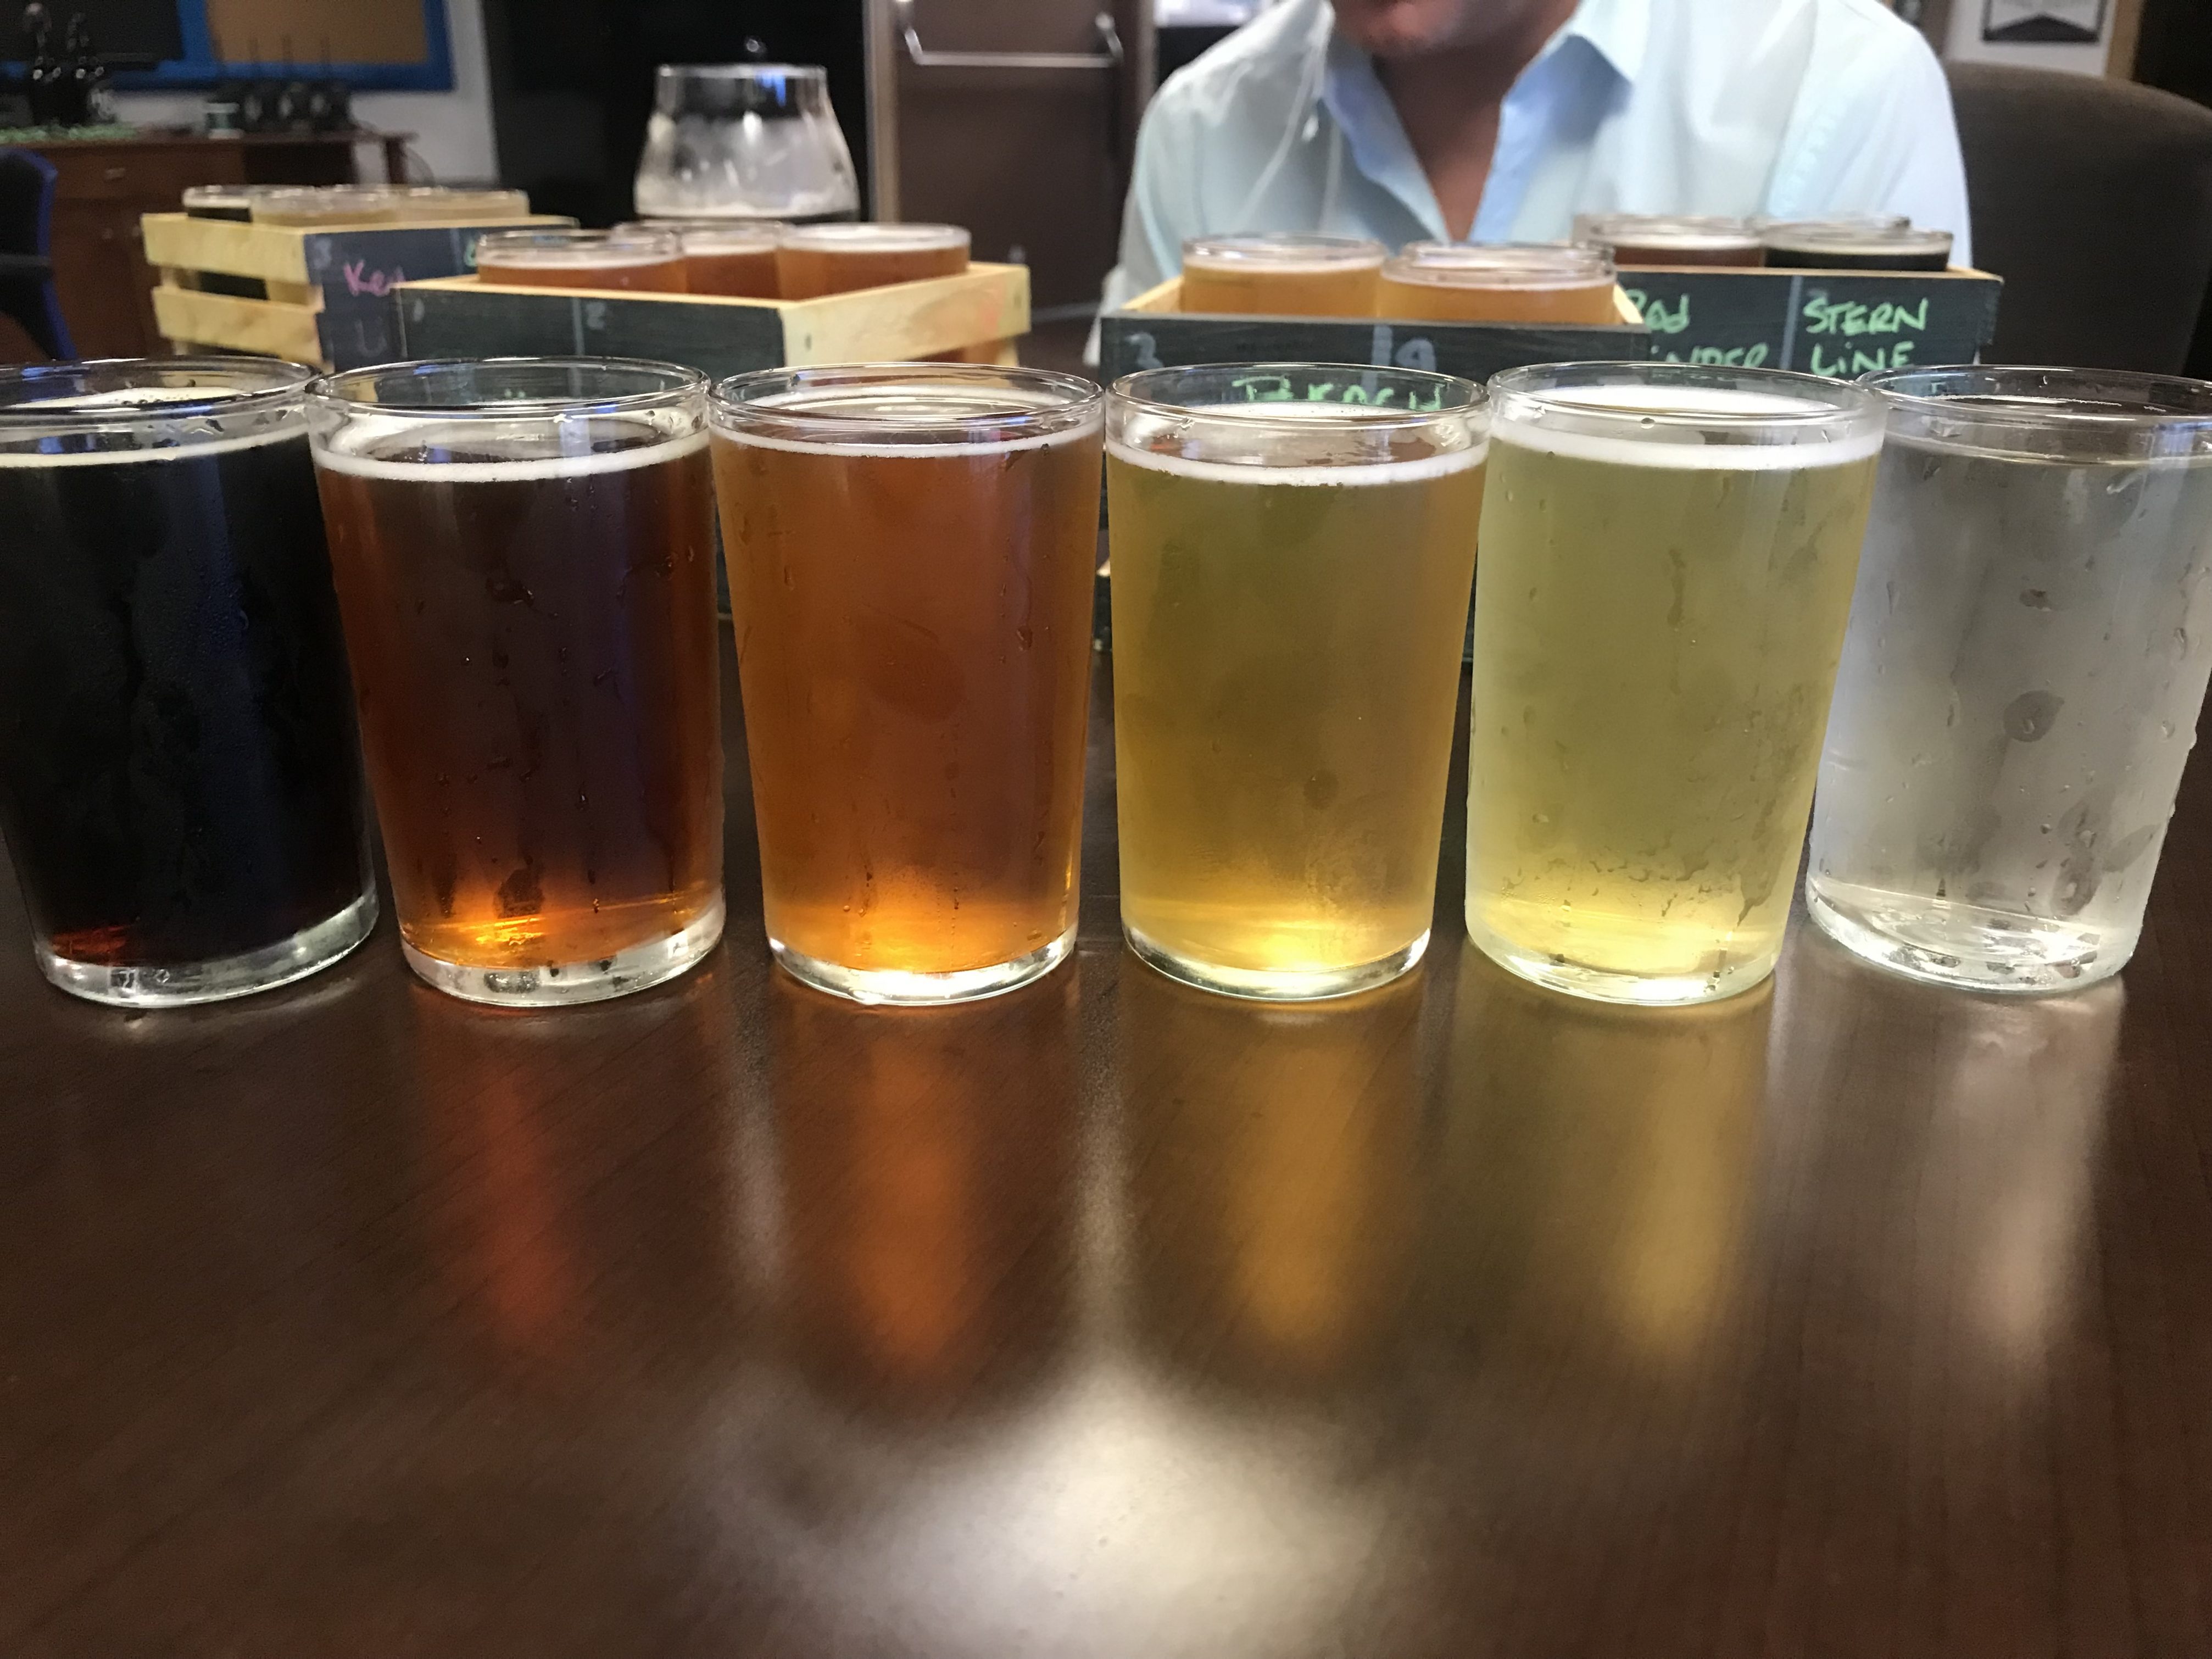 The beers! From L-R: Stern Line Oatmeal Stout, Rod Bender Red Ale, Mission to Marzen, Beach Blonde Ale, Key Lime Apple Cider and the Orange Seltzer